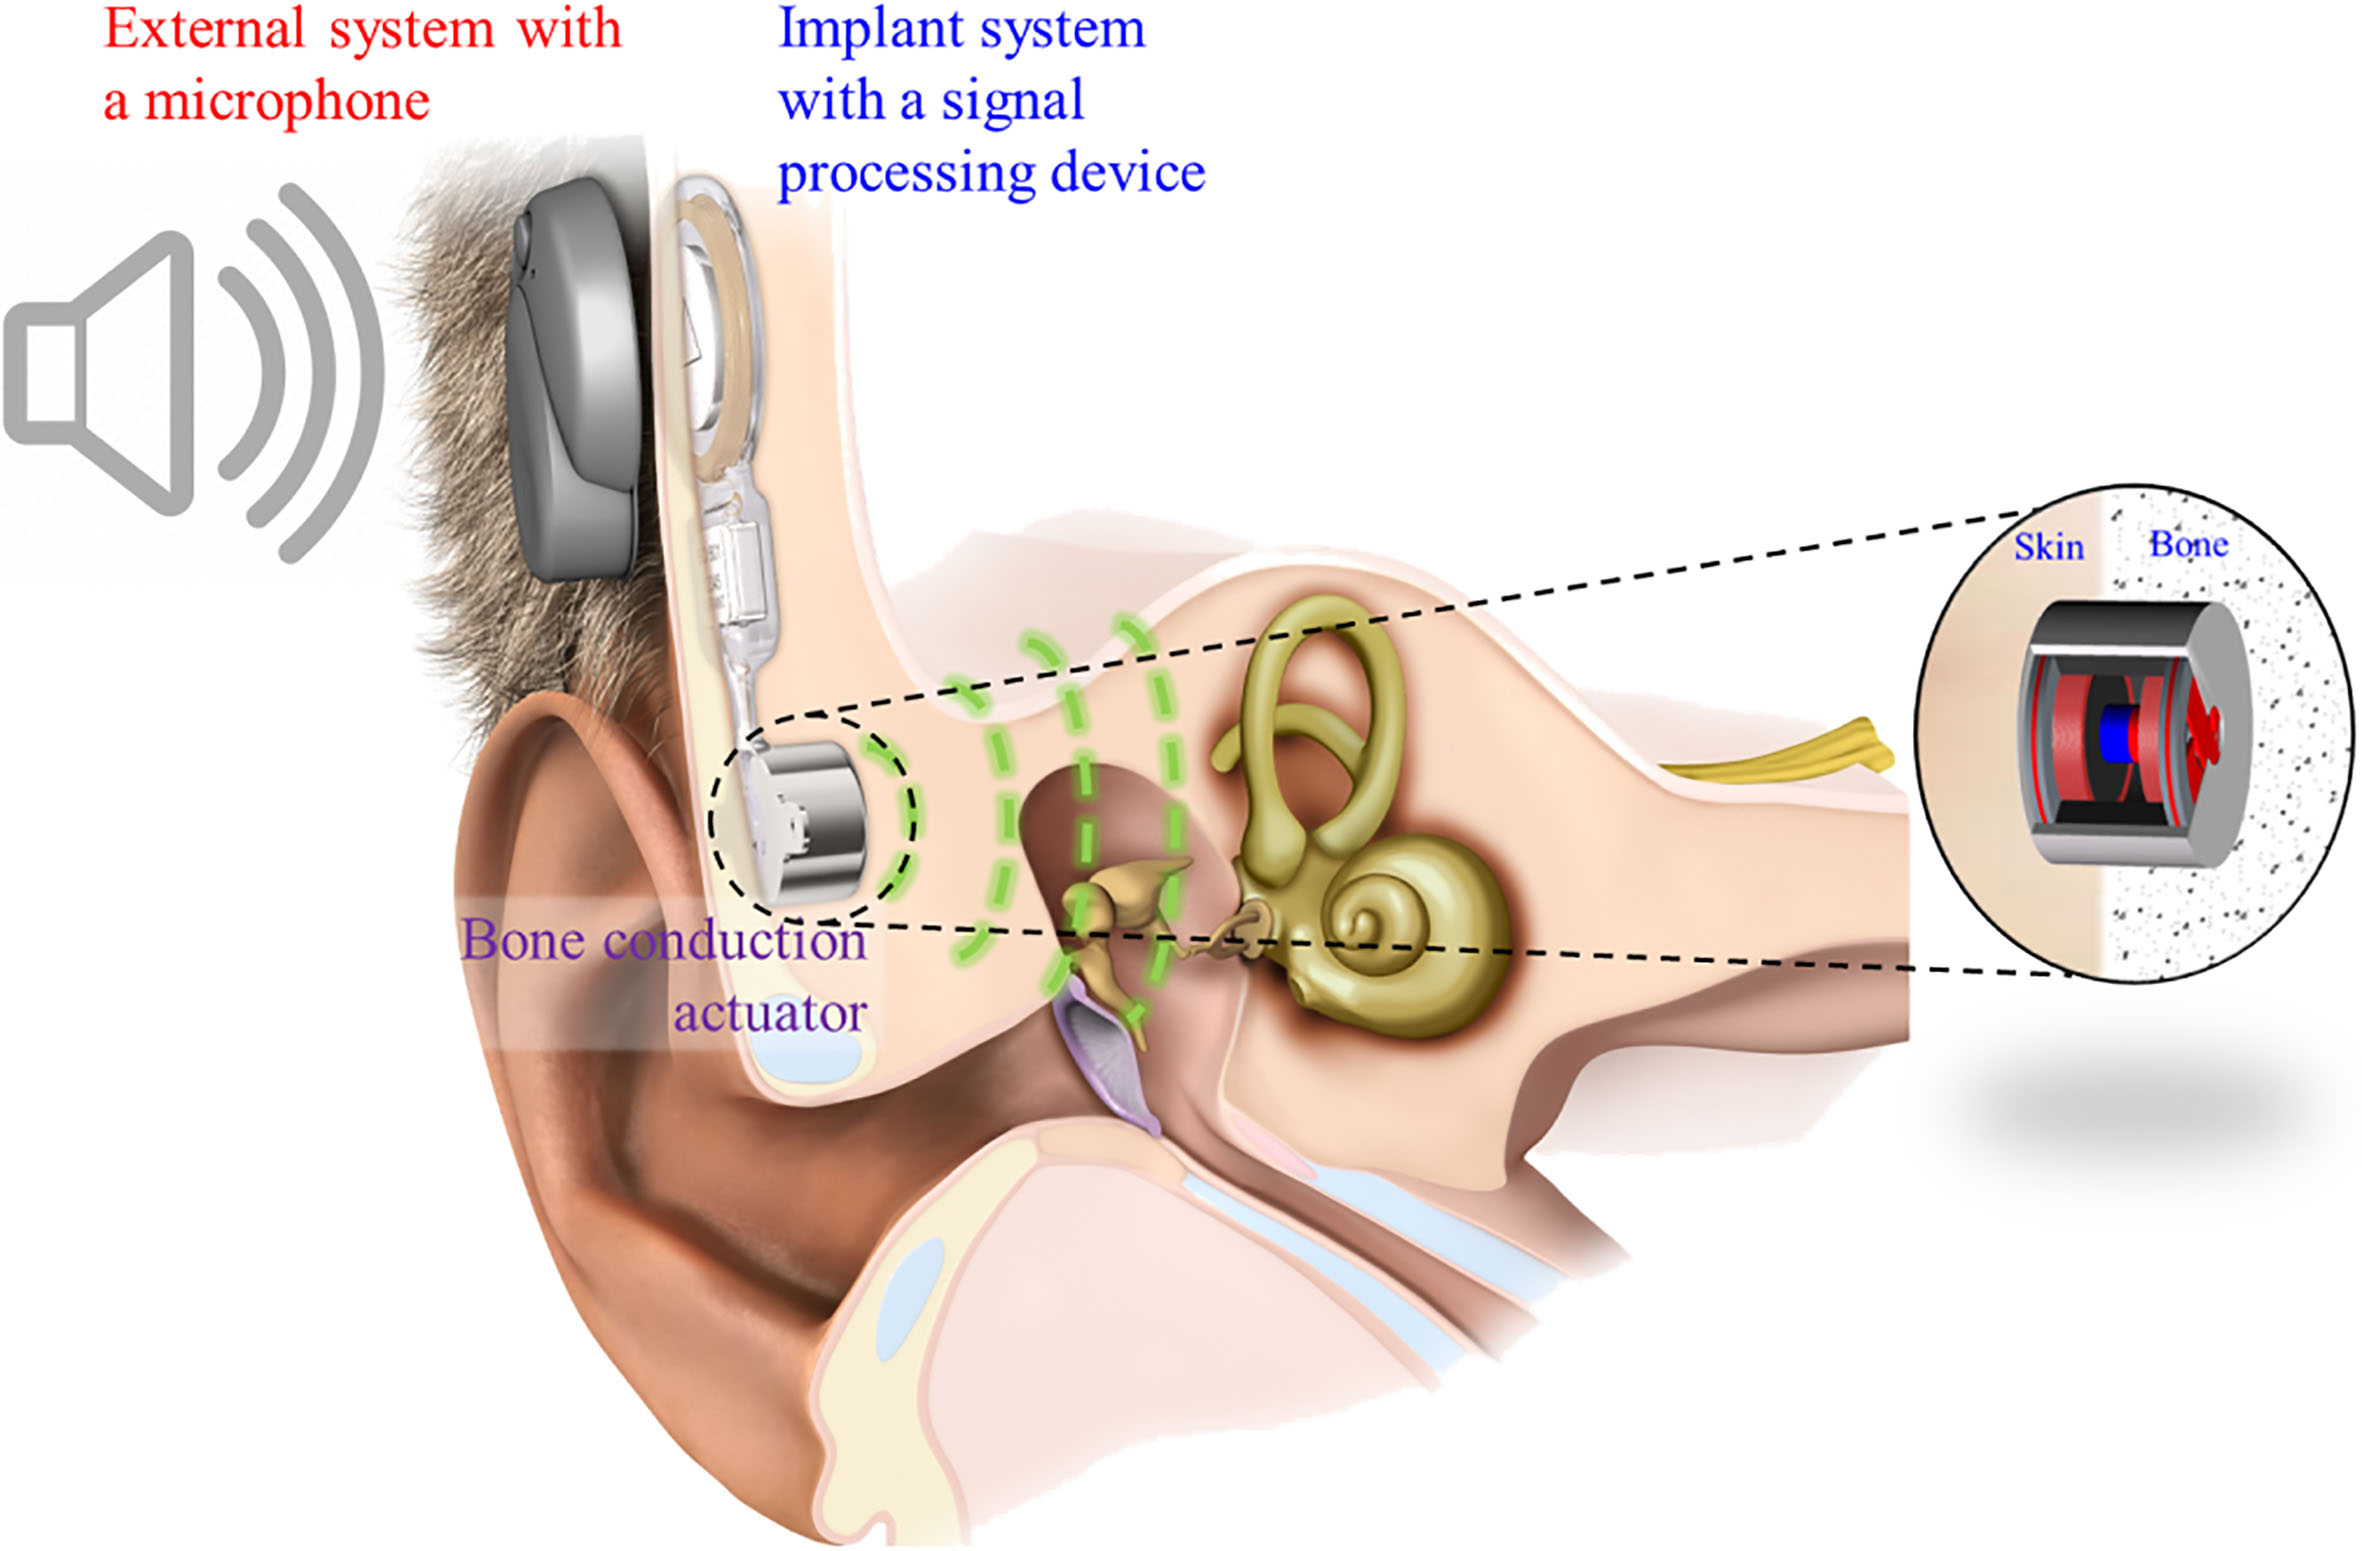 The components of the implantable bone conduction hearing aid [15].